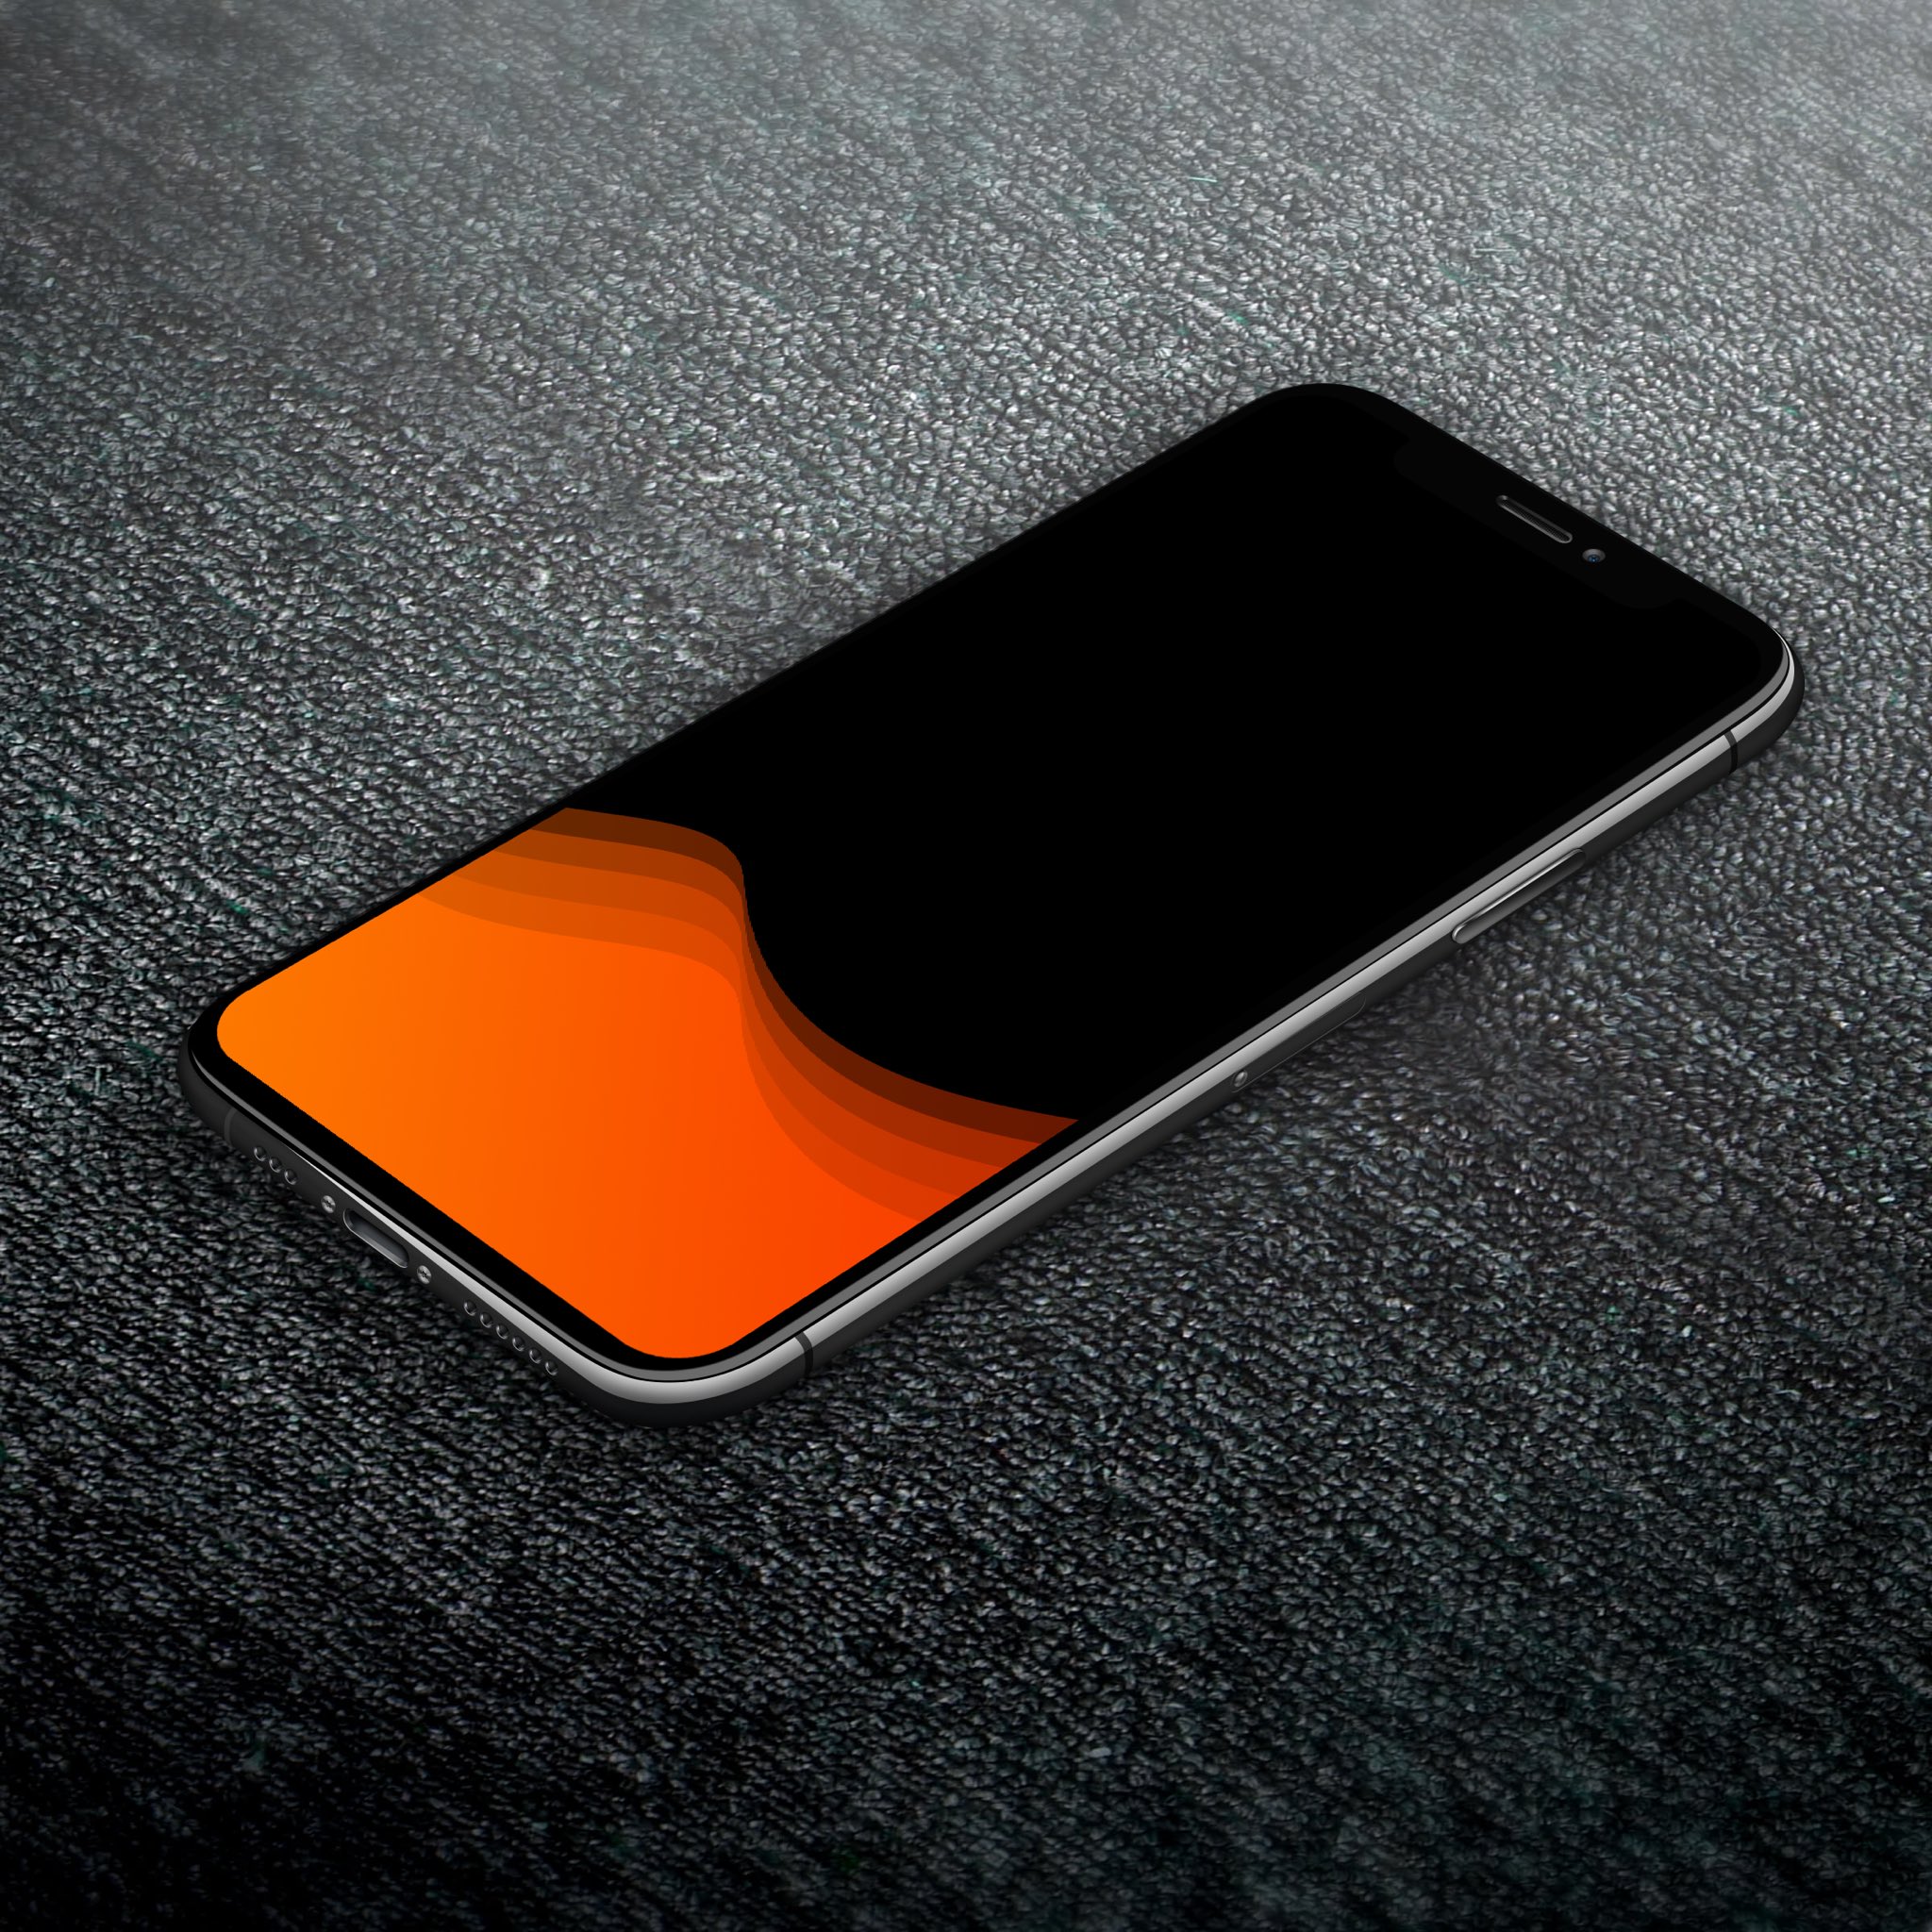 Iphone 11 Pro Max Wallpaper Pictures | Download Free Images on Unsplash